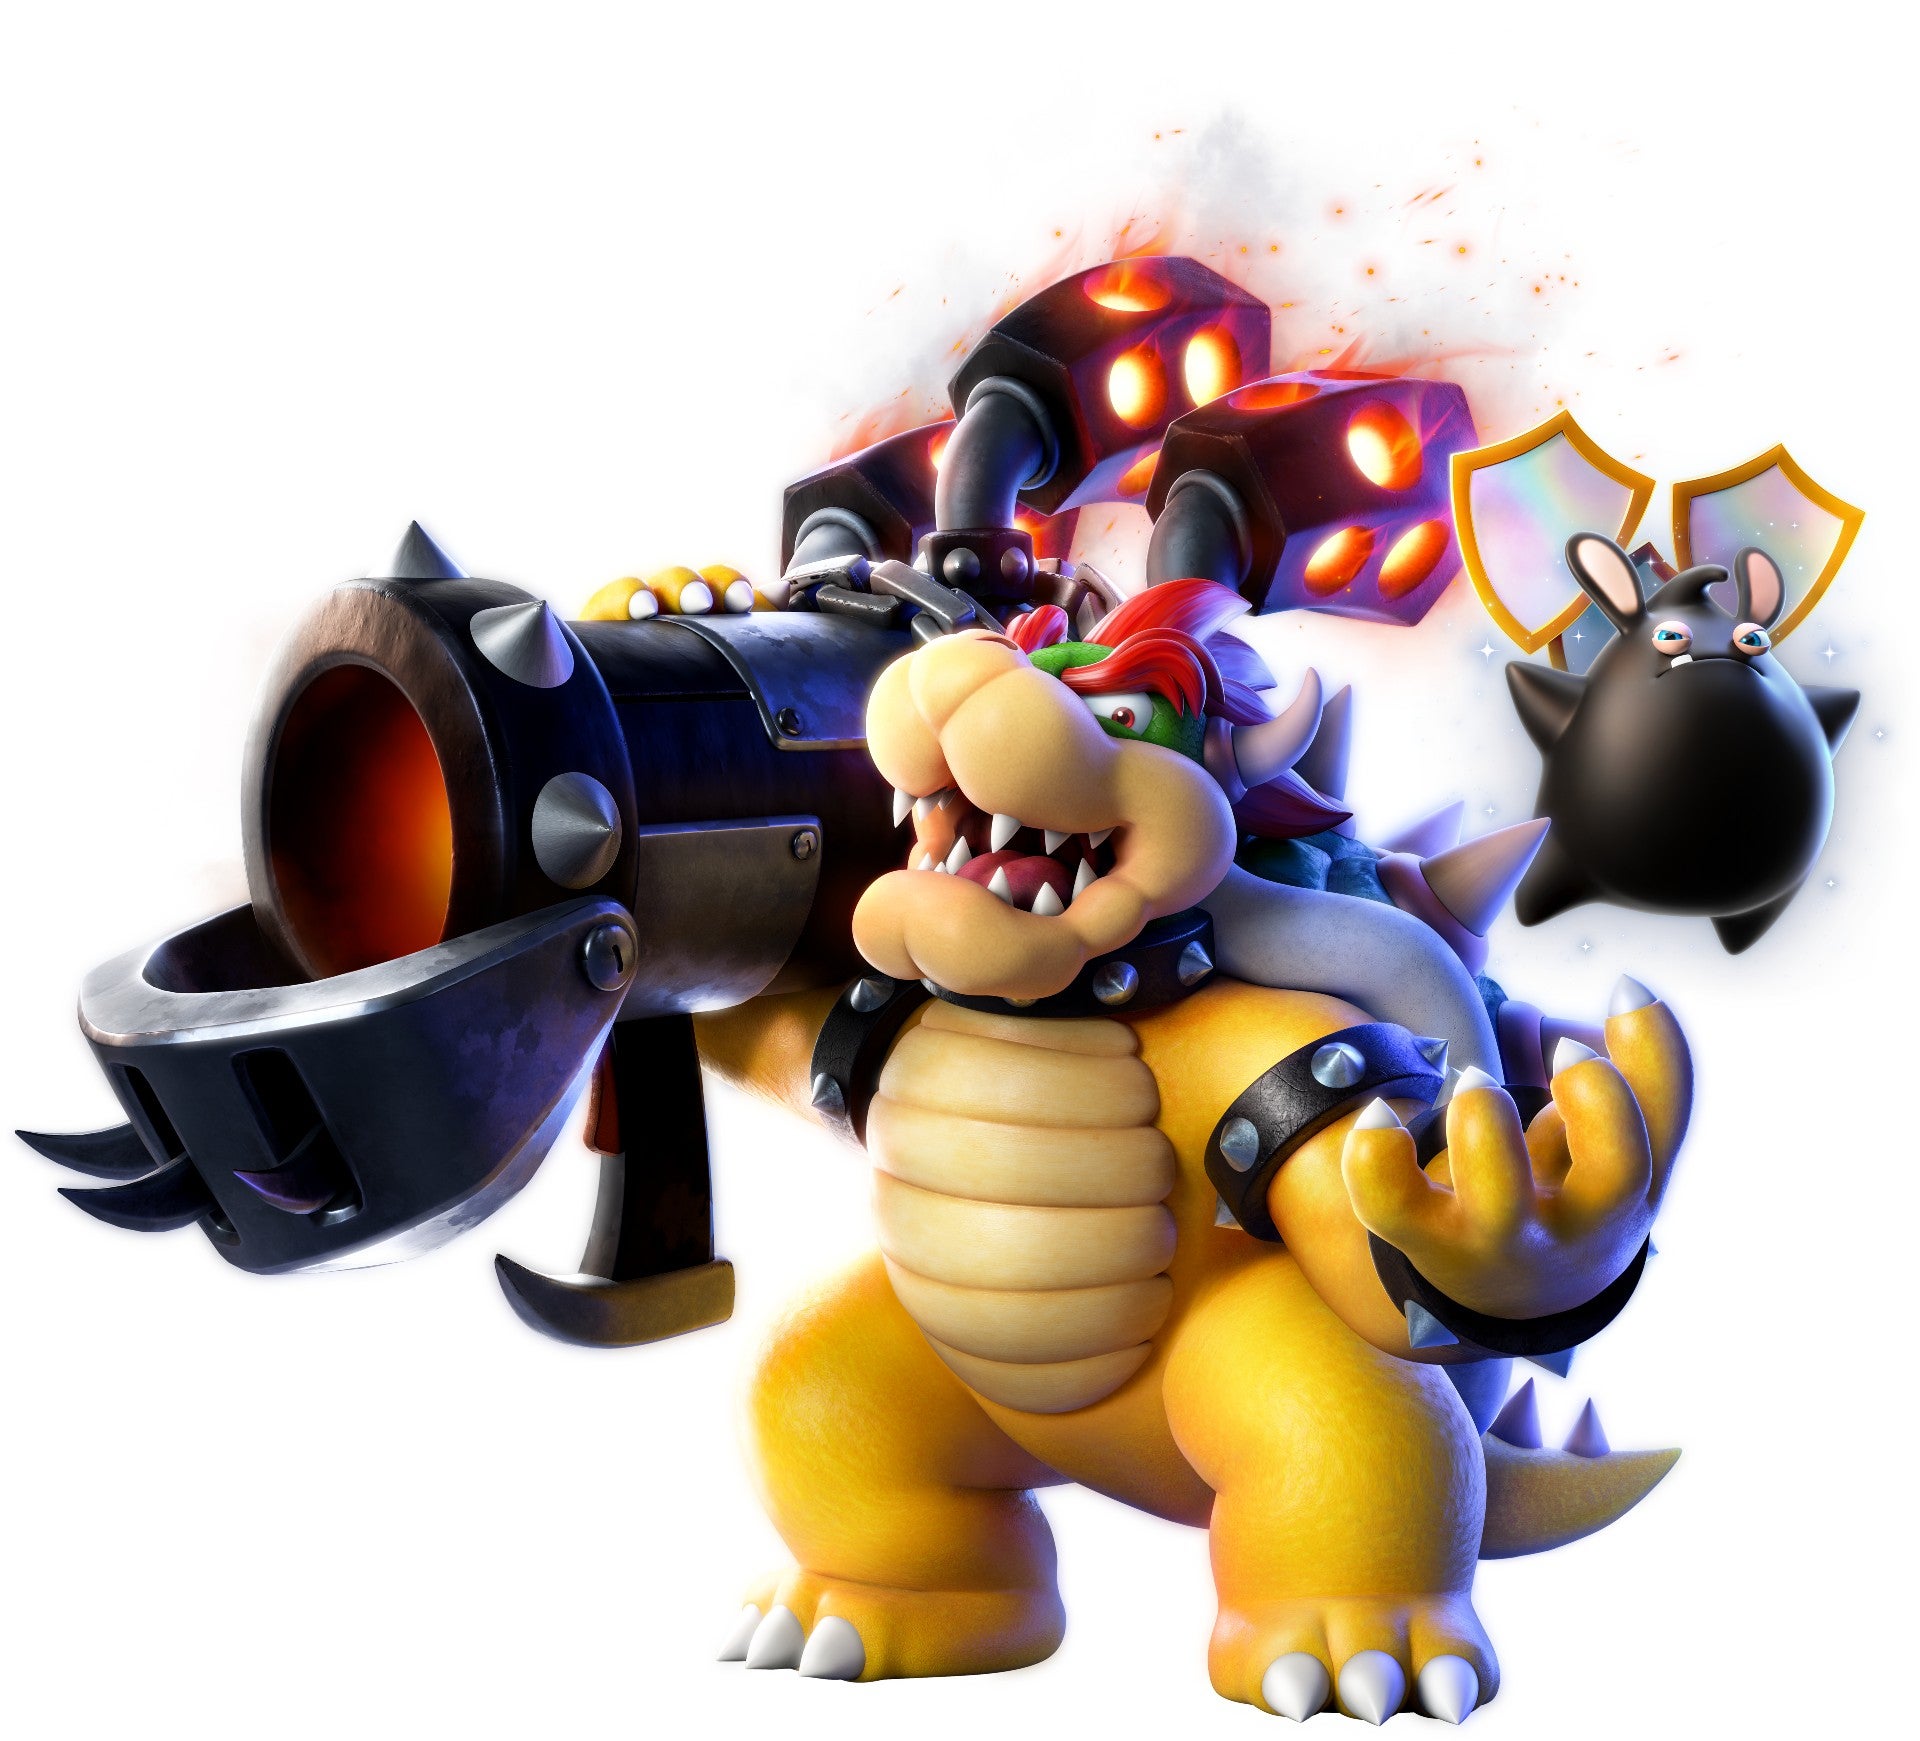 Bowser and his spark in Mario + Rabbids Sparks of Hope.